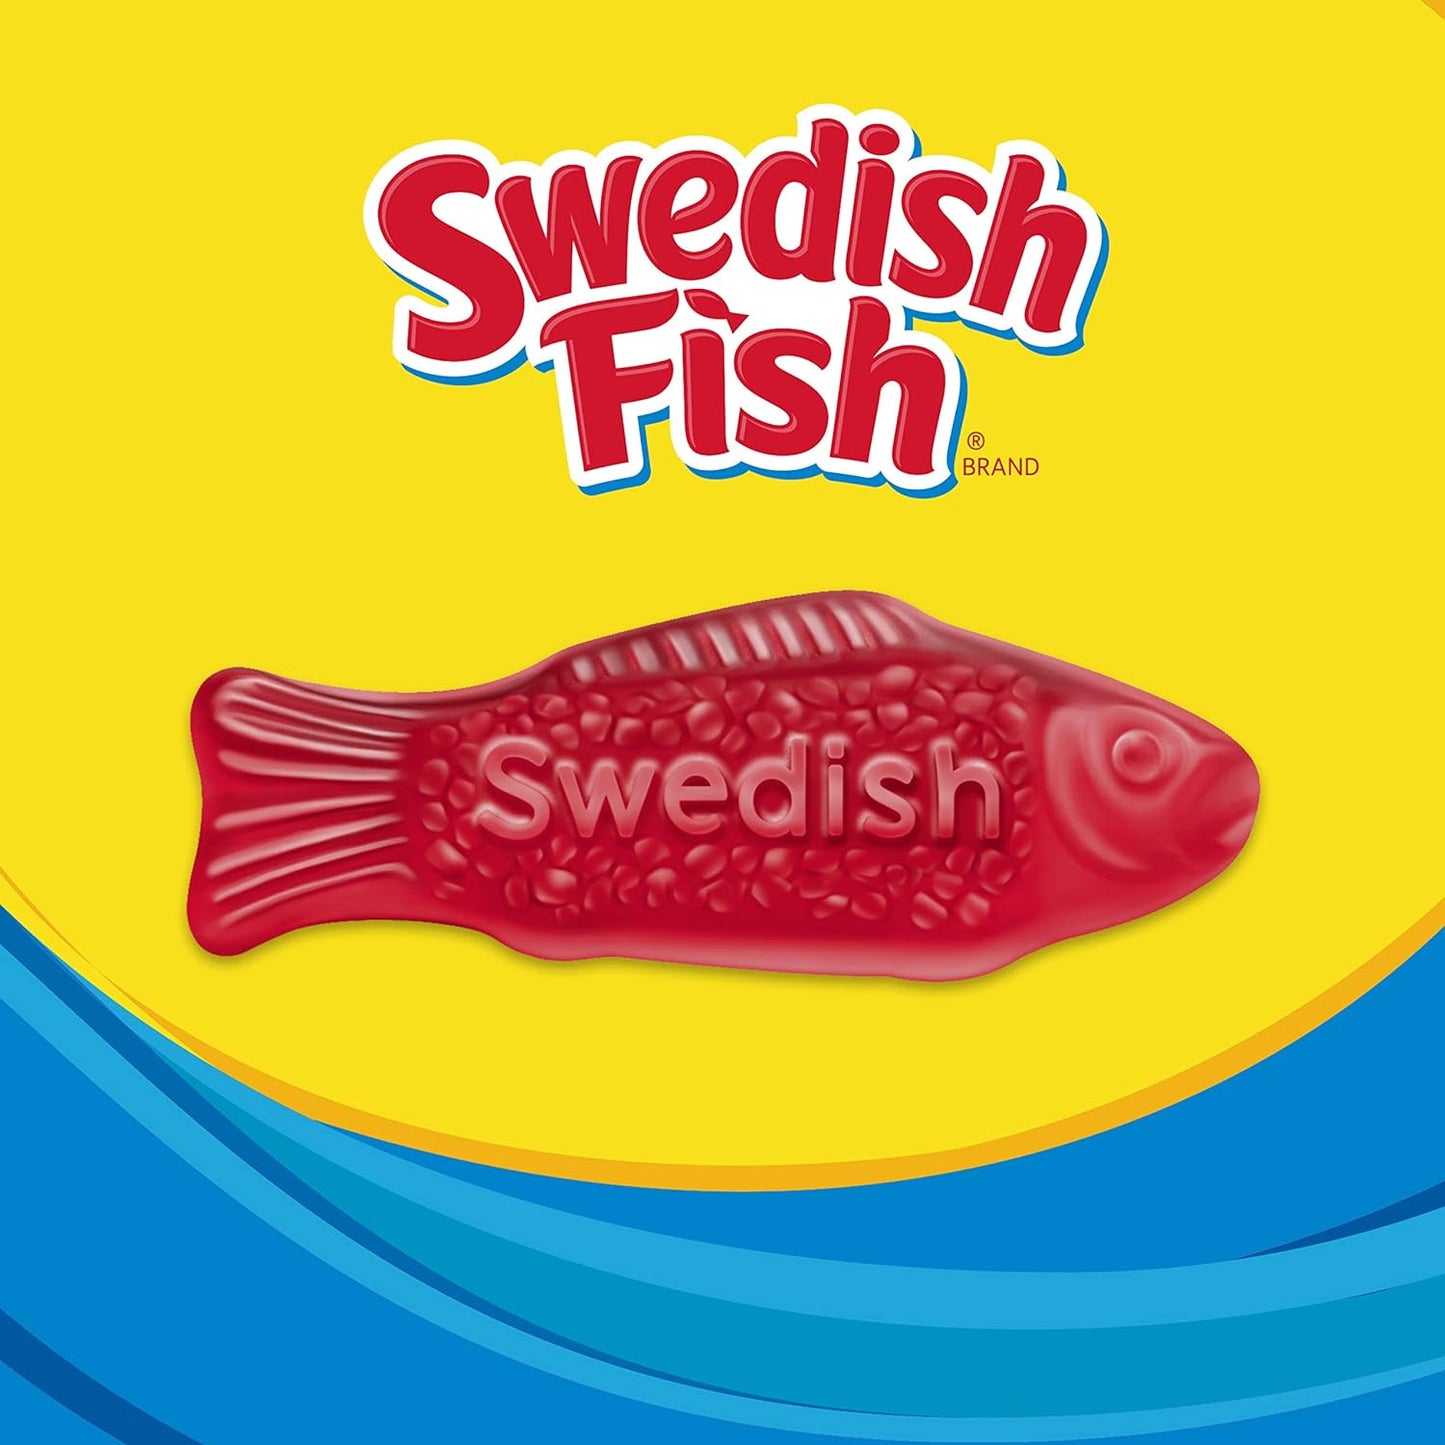 SWEDISH FISH Soft & Chewy Candy, 12 Ct 3.6 oz Bags - USA